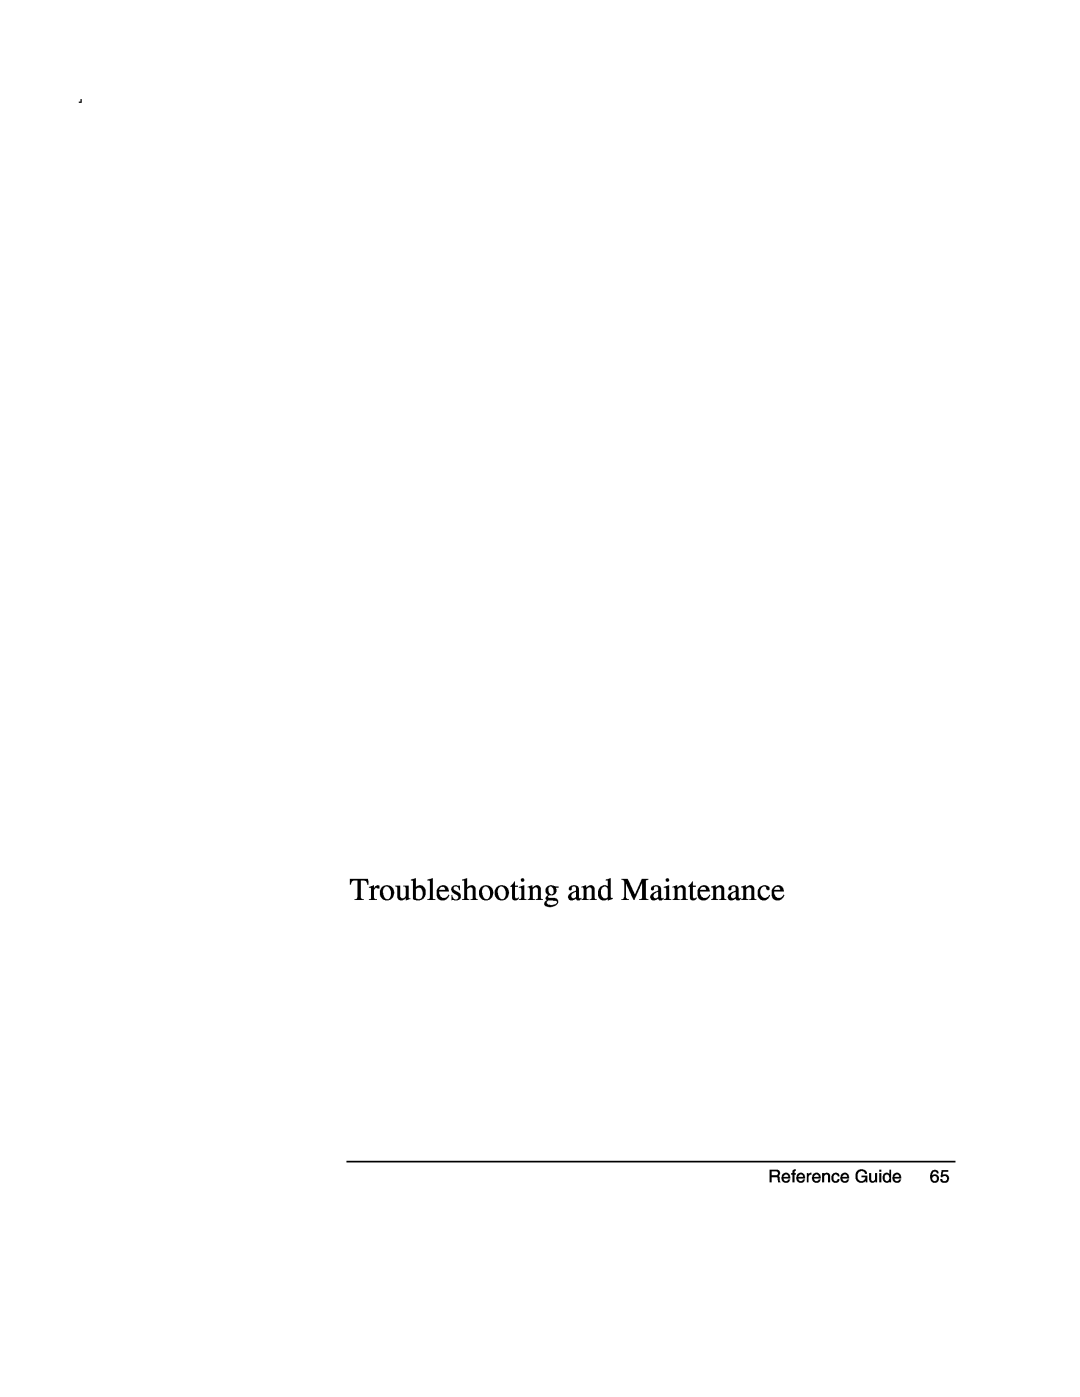 Compaq AMC20493-KT5 manual Troubleshooting and Maintenance, Reference Guide 